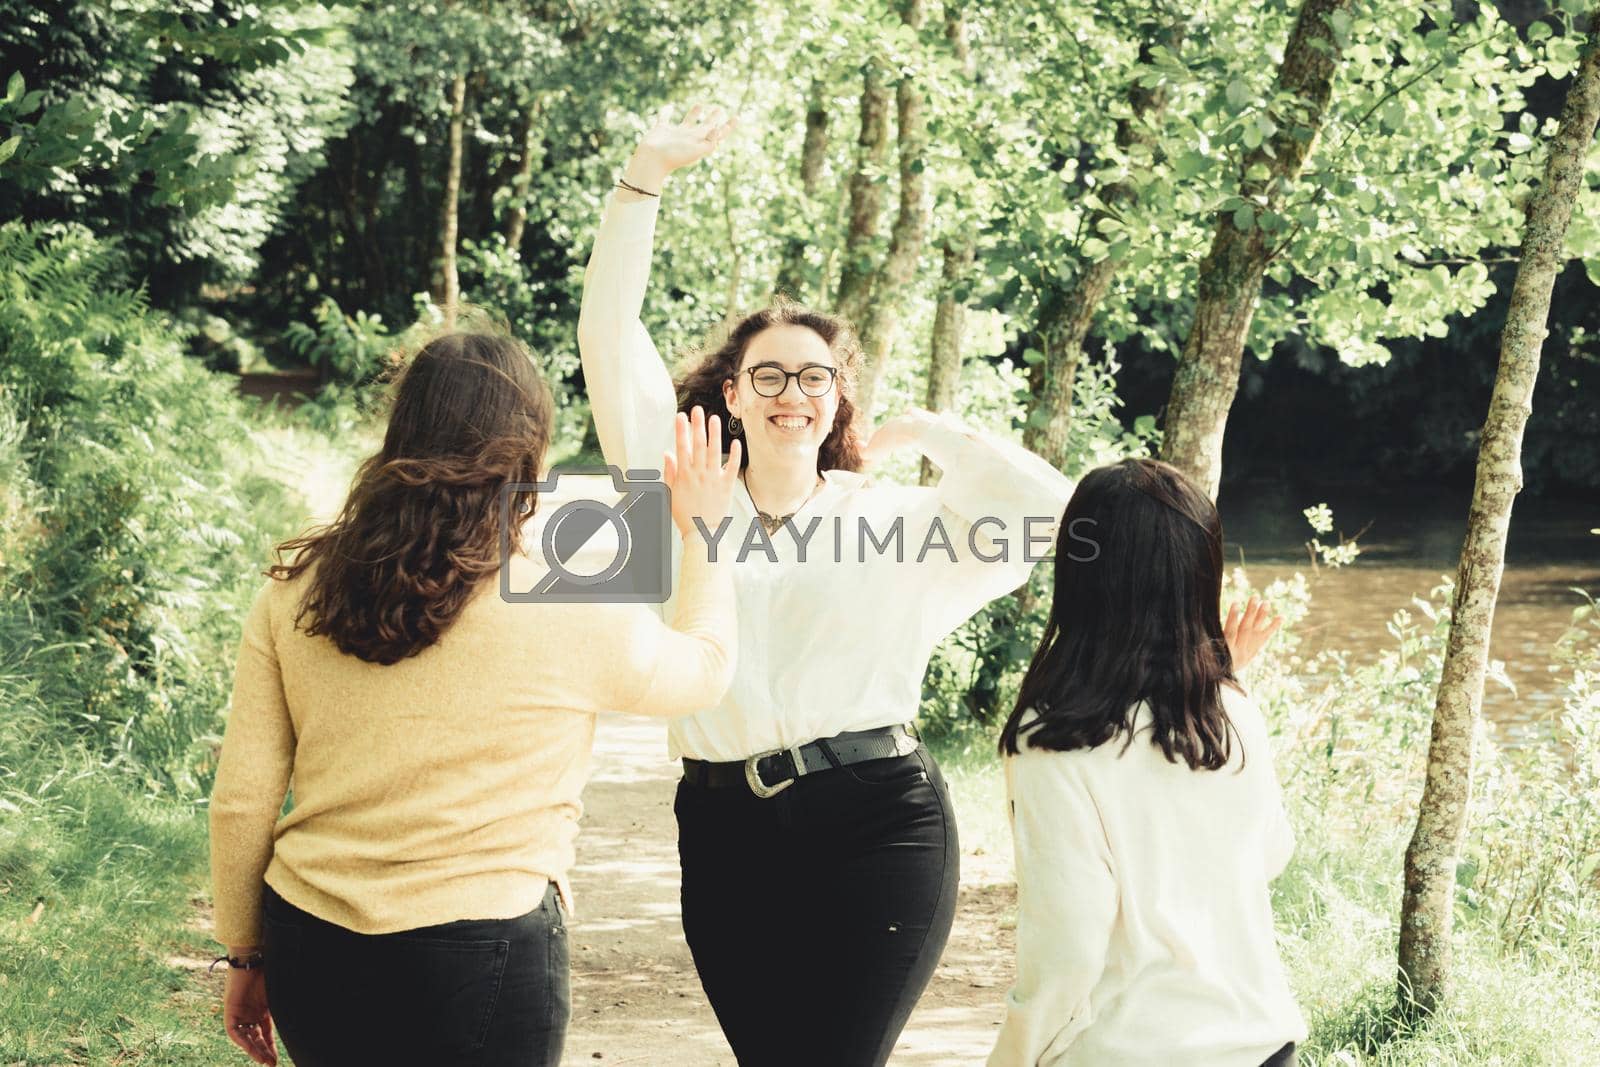 Royalty free image of One young woman about to high five two friends, friendship and fun concept, forest day, sunny by AveCalvar